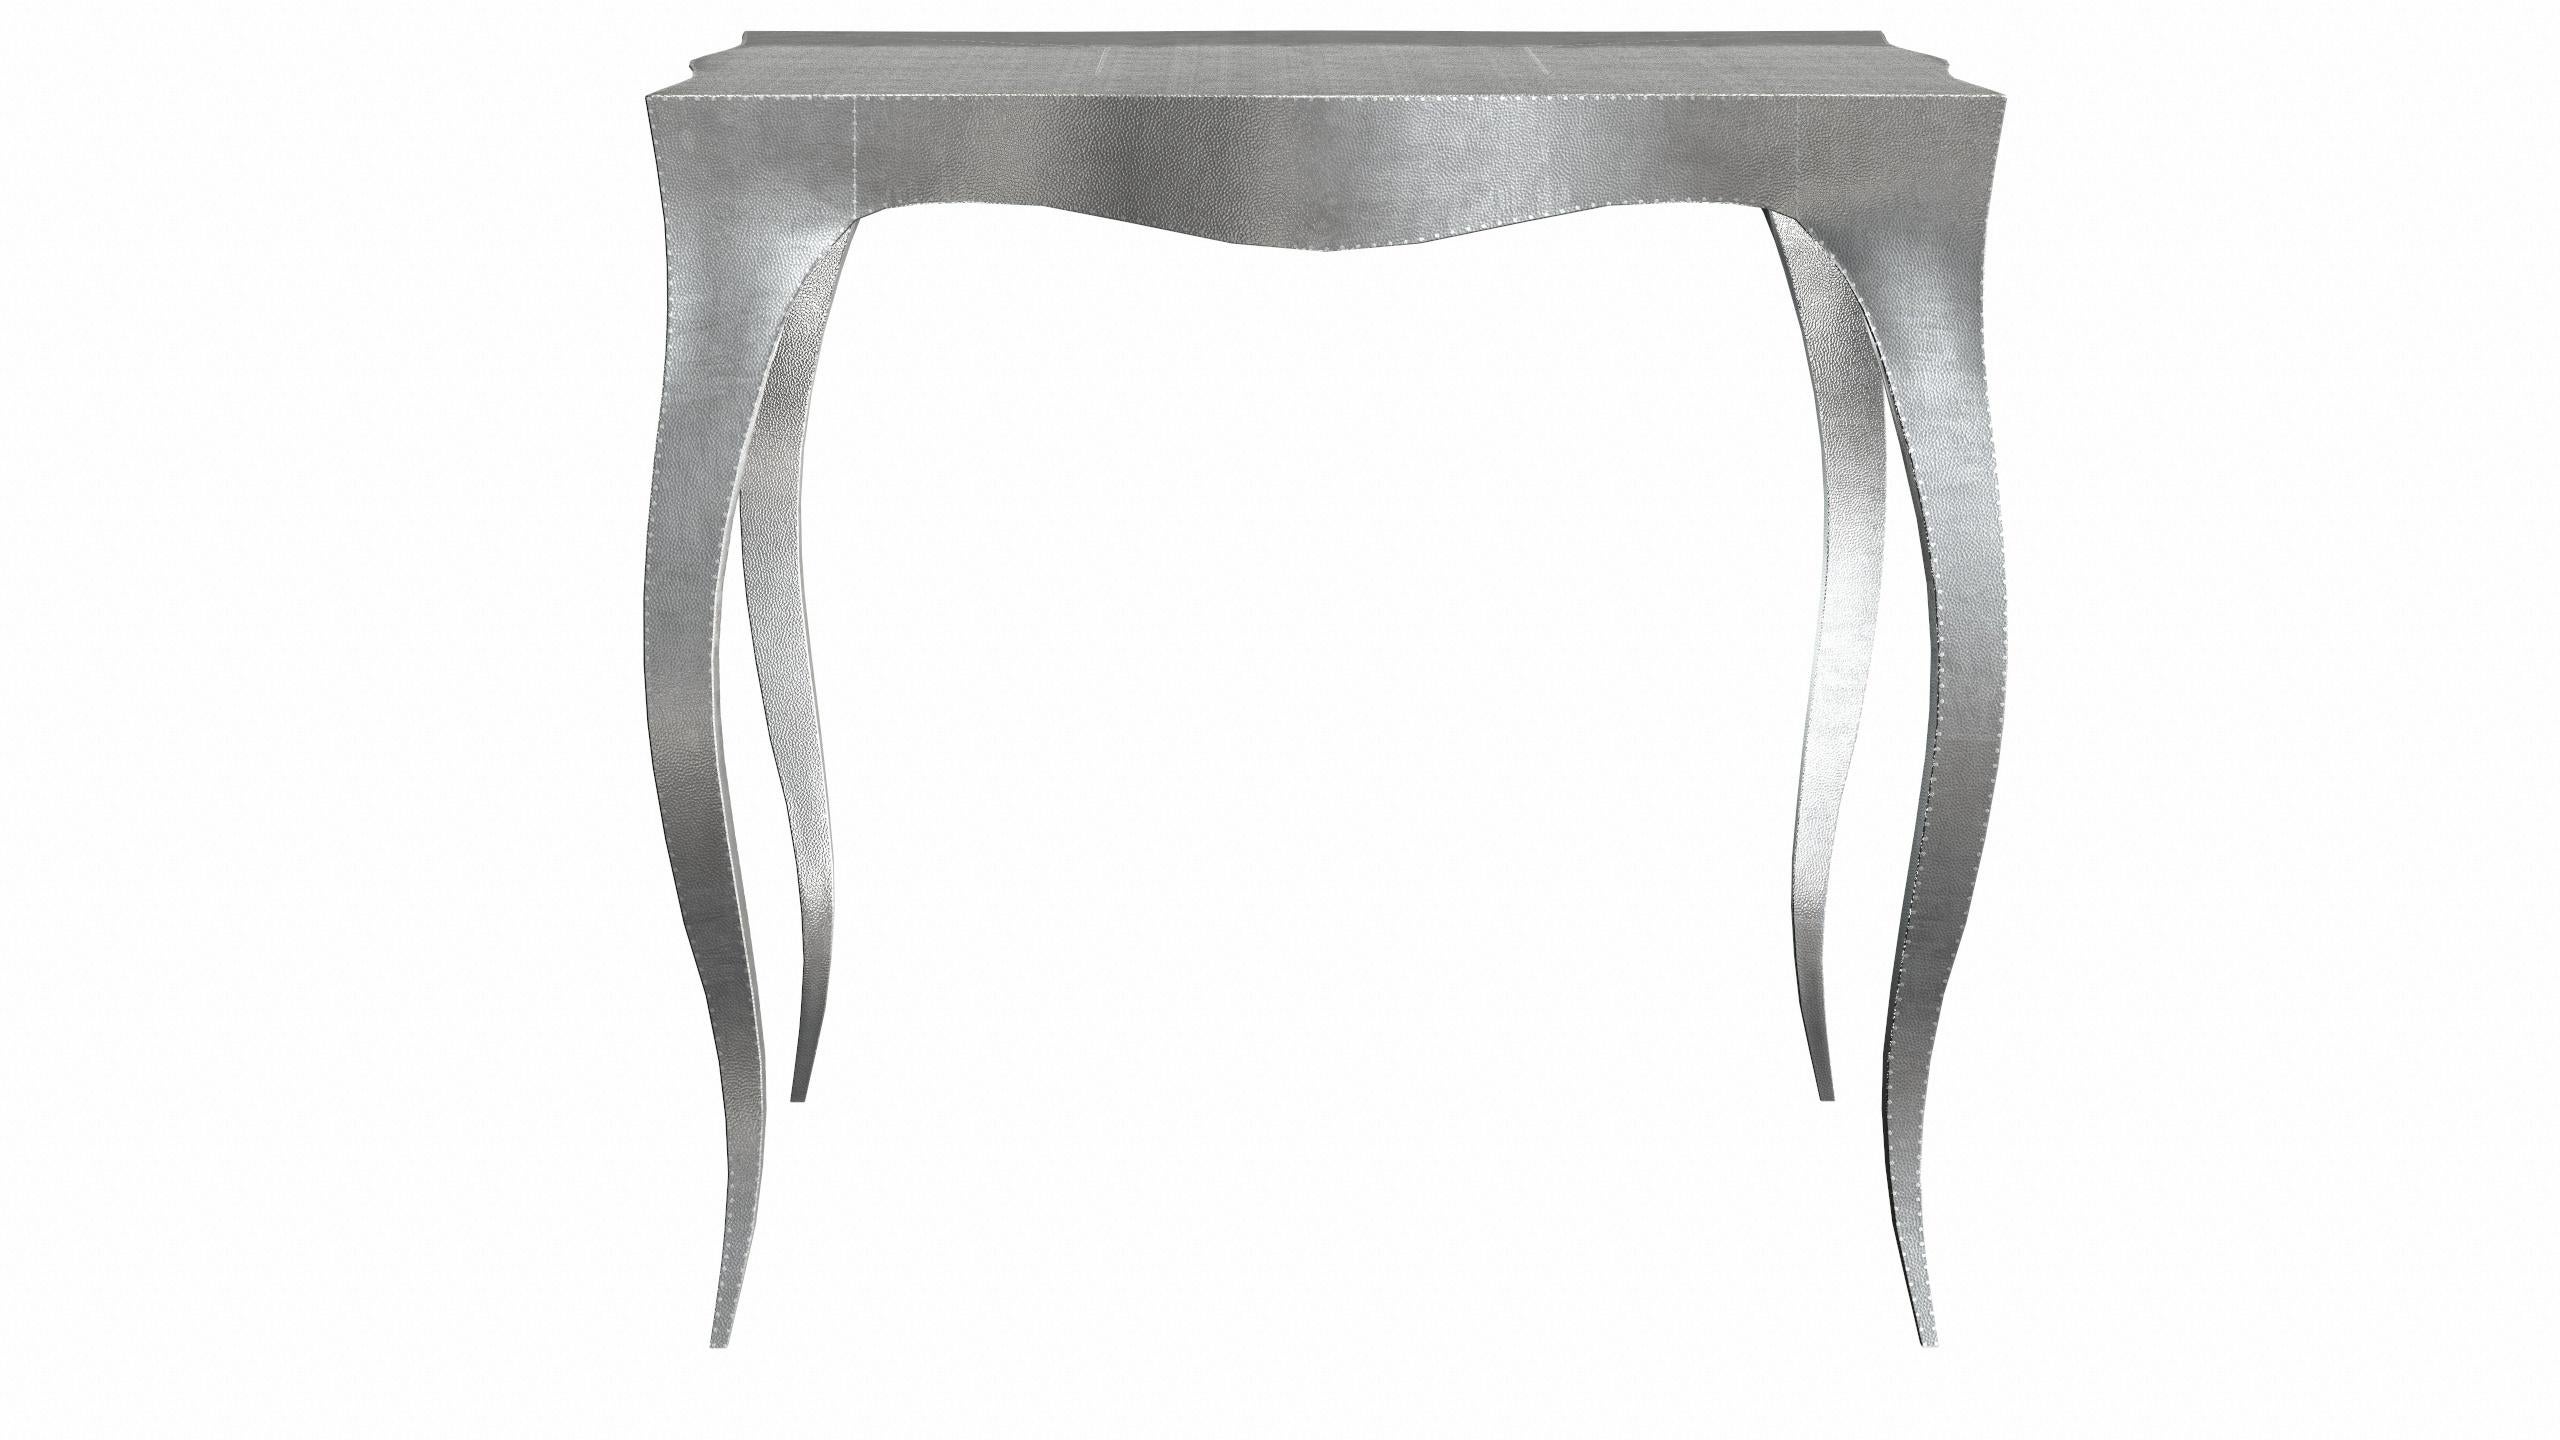 American Louise Art Deco Industrial and Work Table Mid. Hammered White Bronze  For Sale